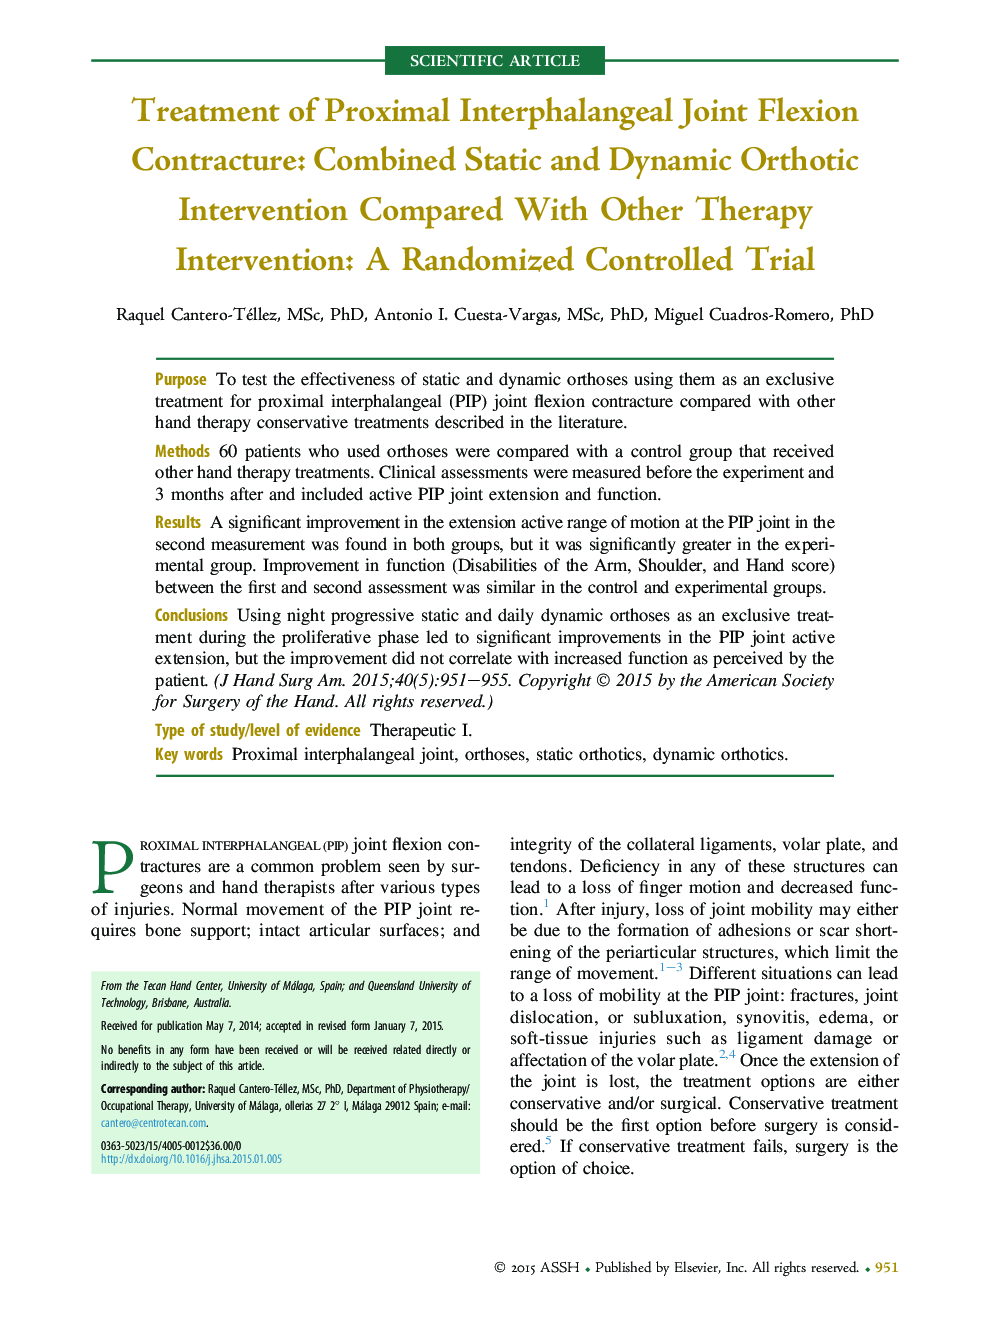 Treatment of Proximal Interphalangeal Joint Flexion Contracture: Combined Static and Dynamic Orthotic Intervention Compared With Other Therapy Intervention: A Randomized Controlled Trial 